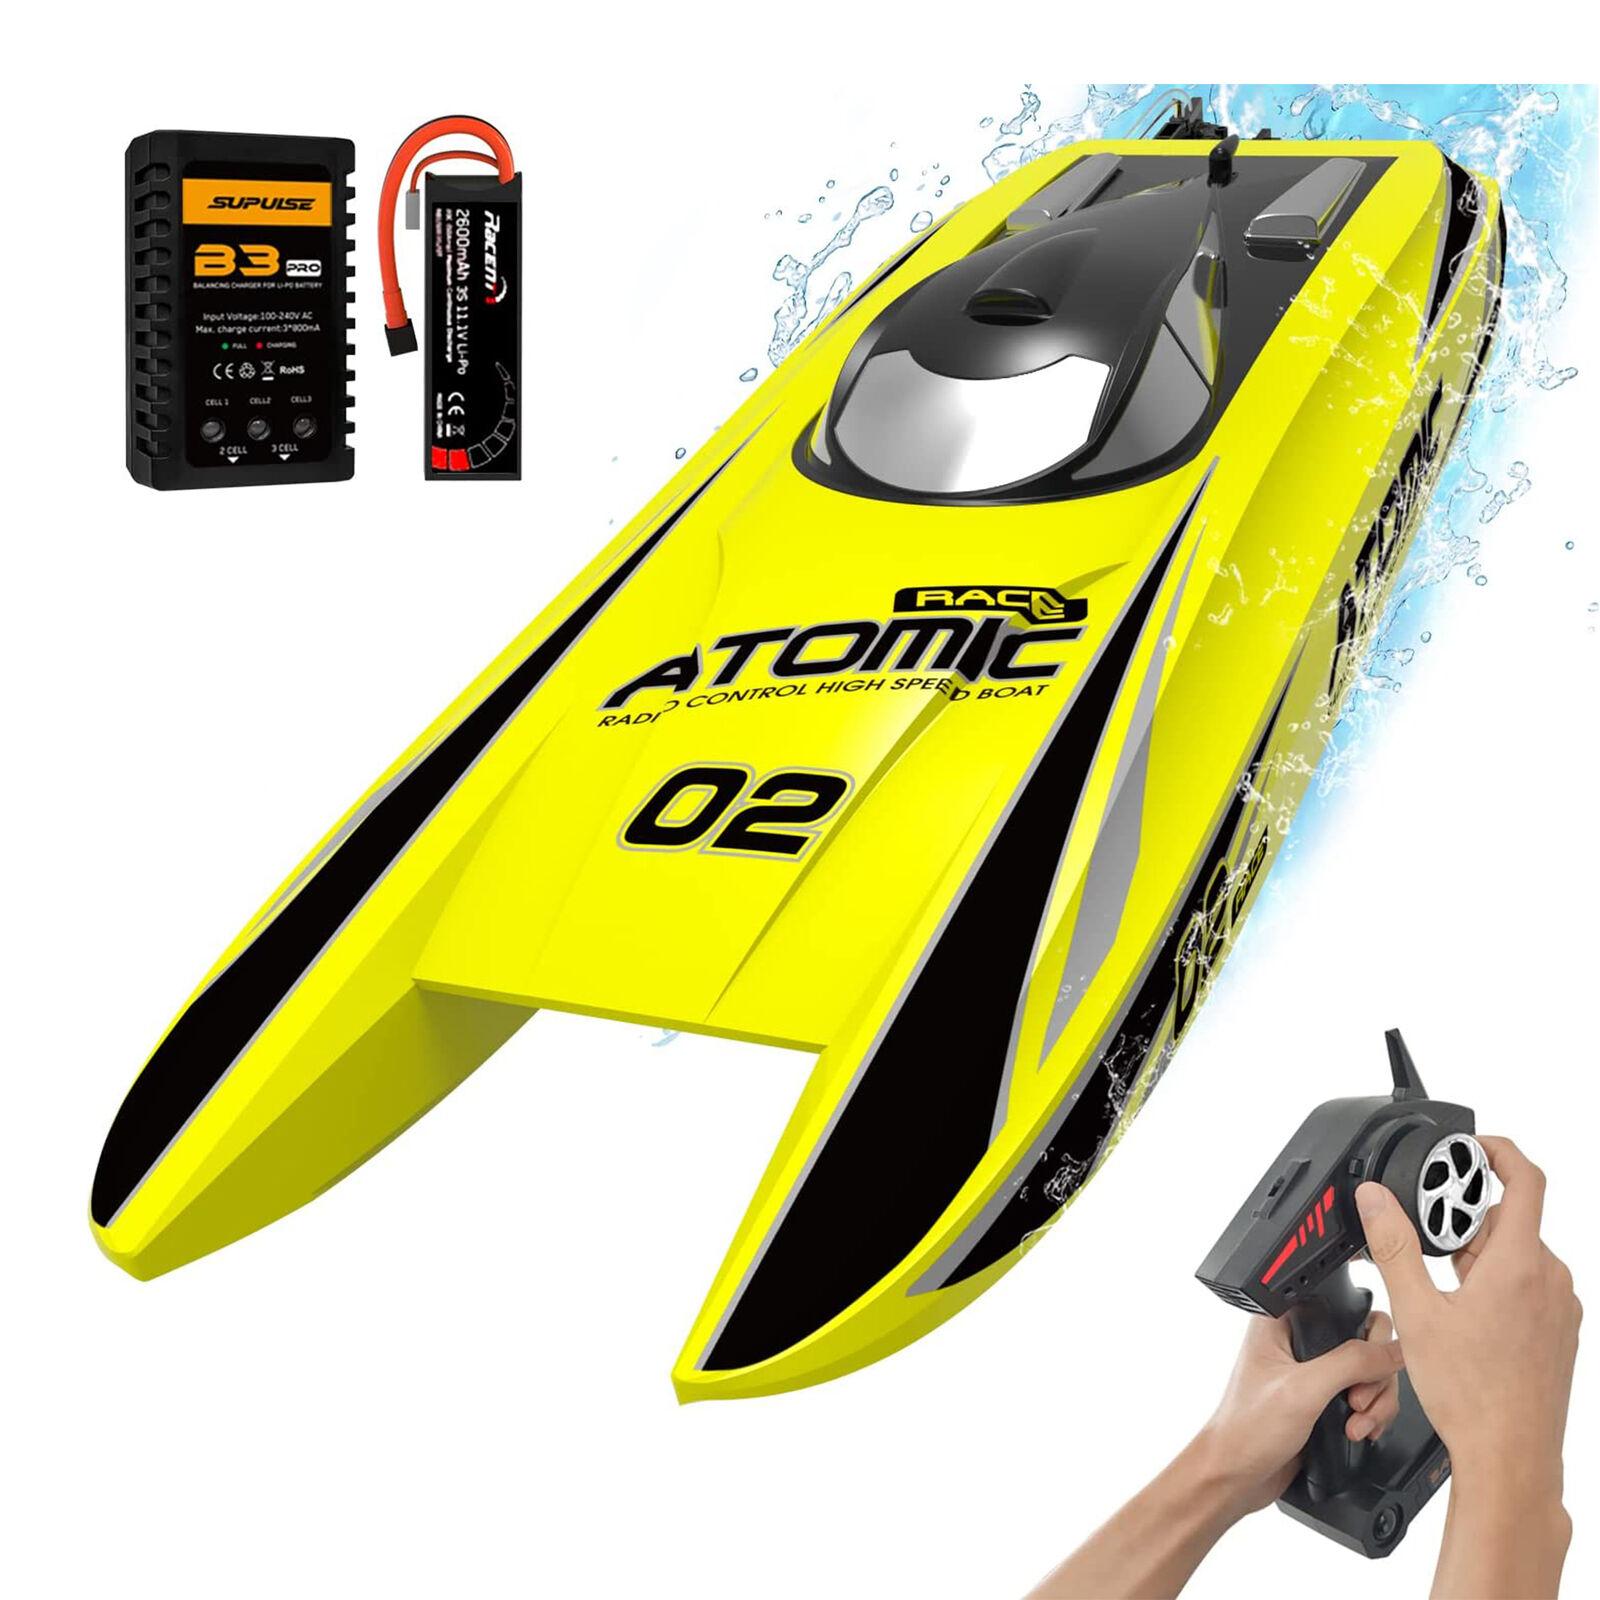 Ac Rc Boats: AC RC boat power sources